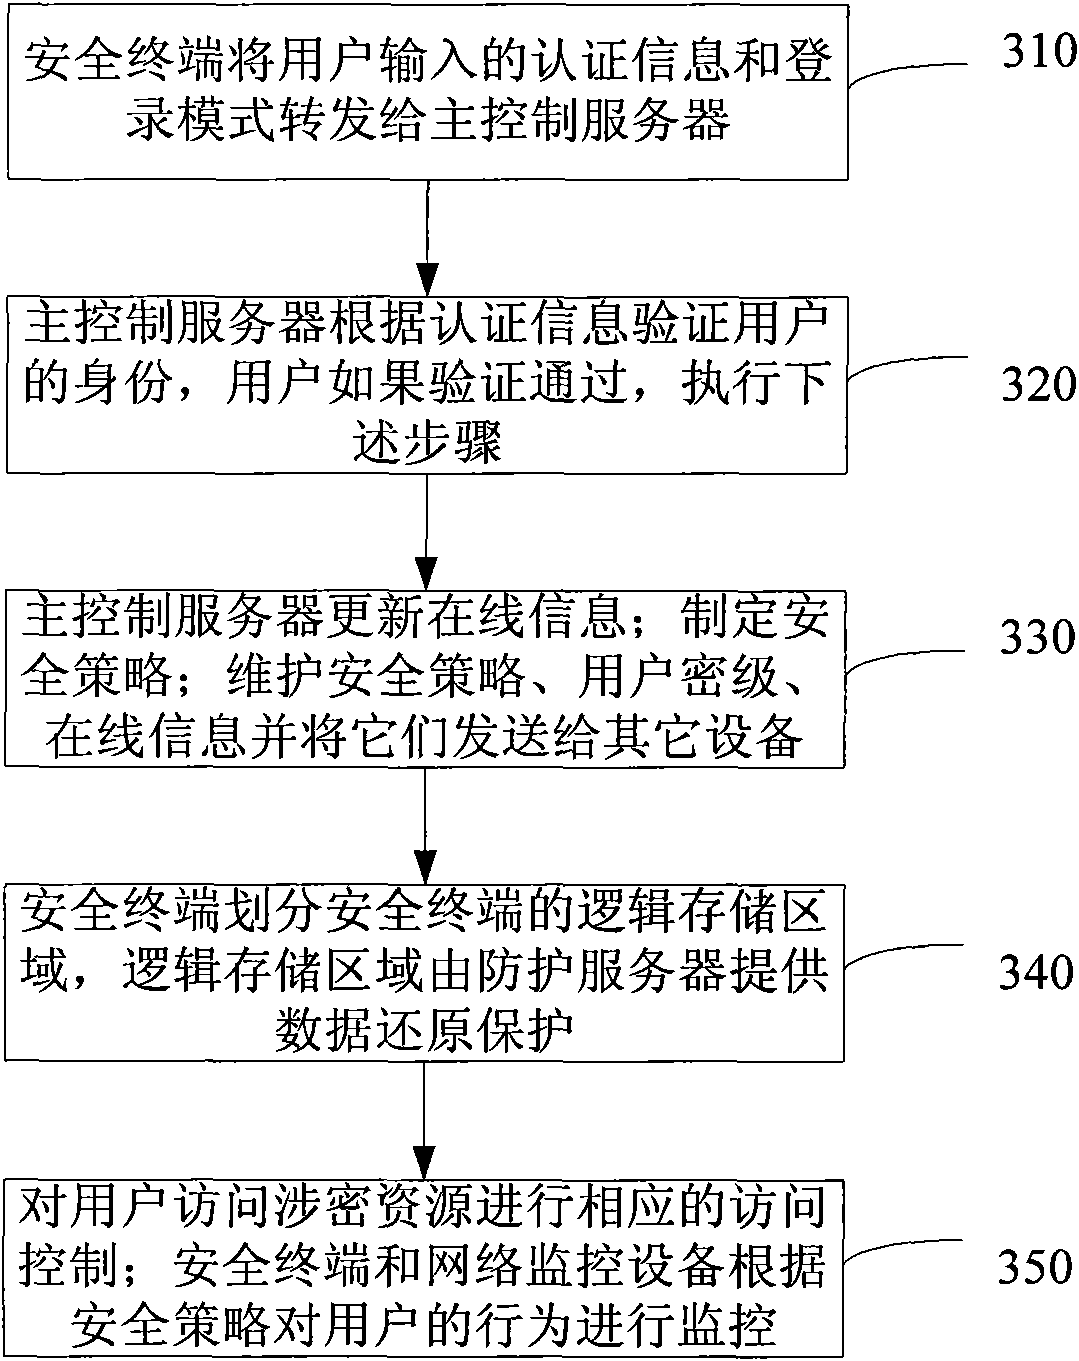 Local area network system and method for maintaining safety thereof